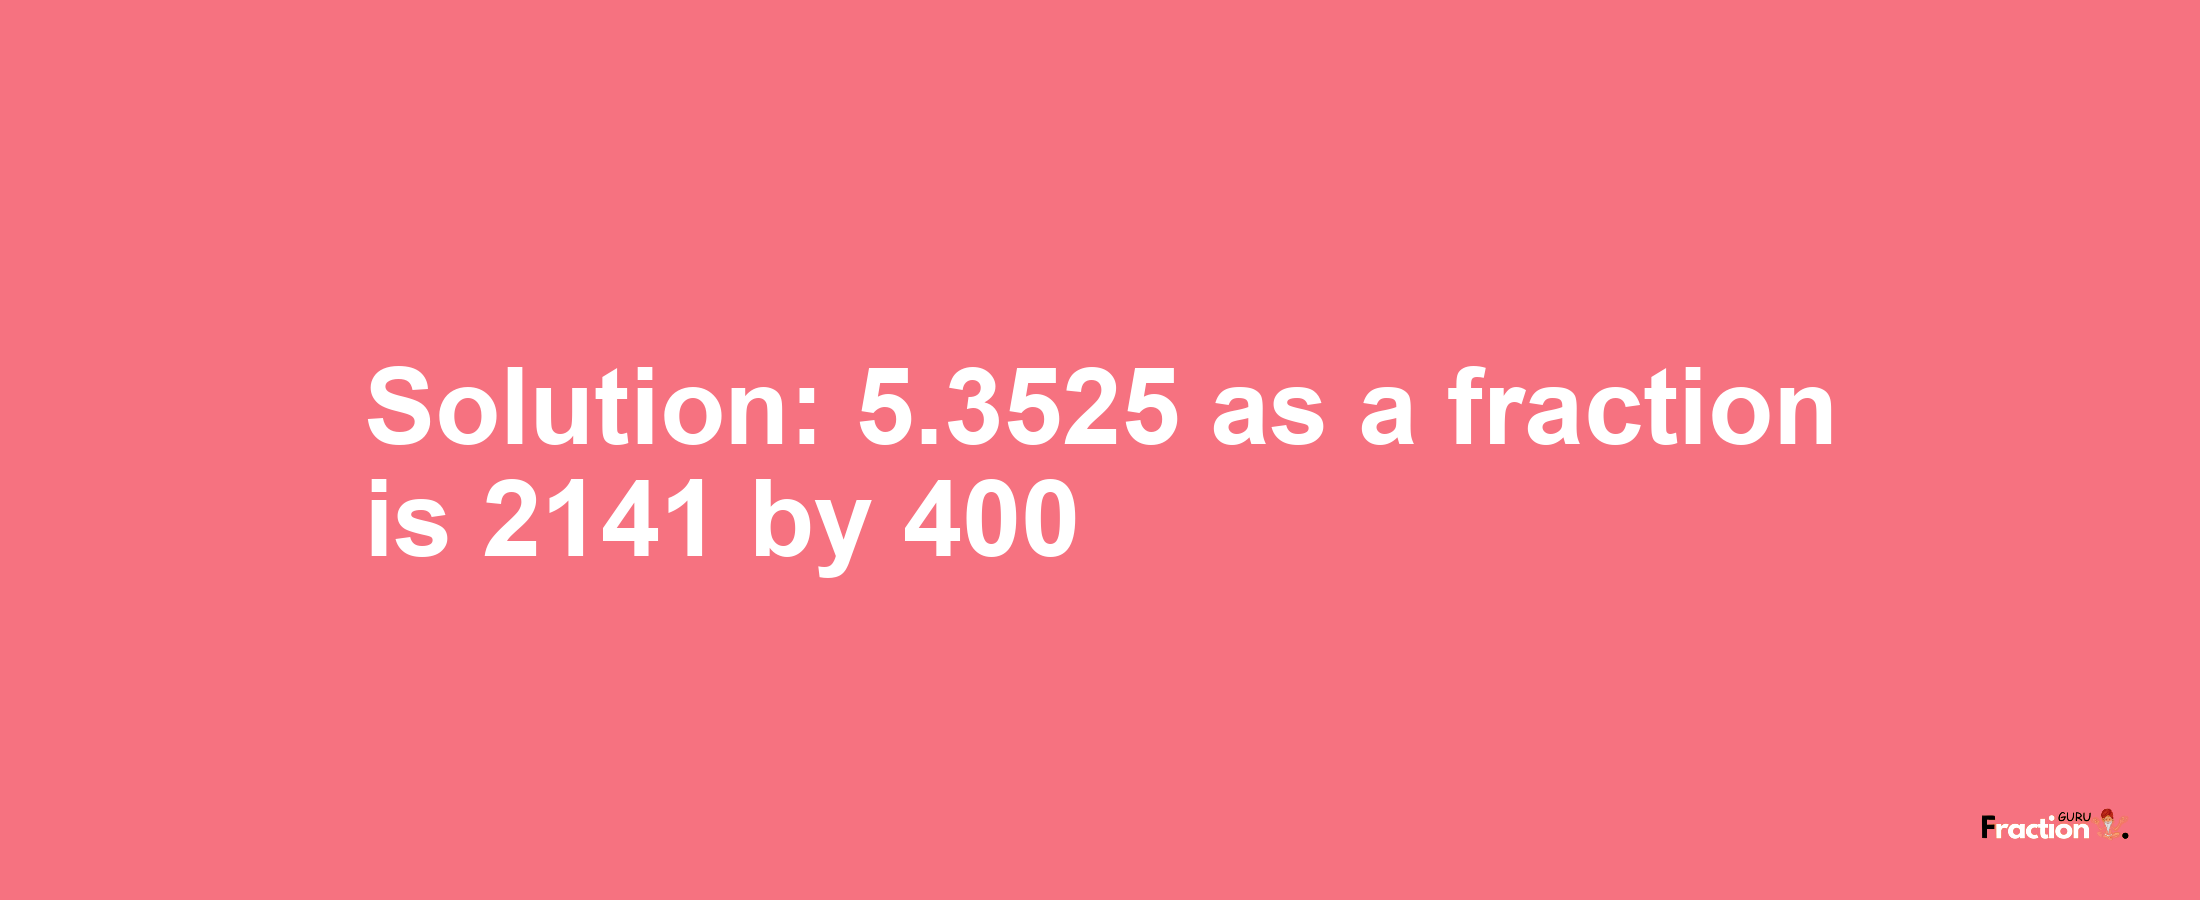 Solution:5.3525 as a fraction is 2141/400